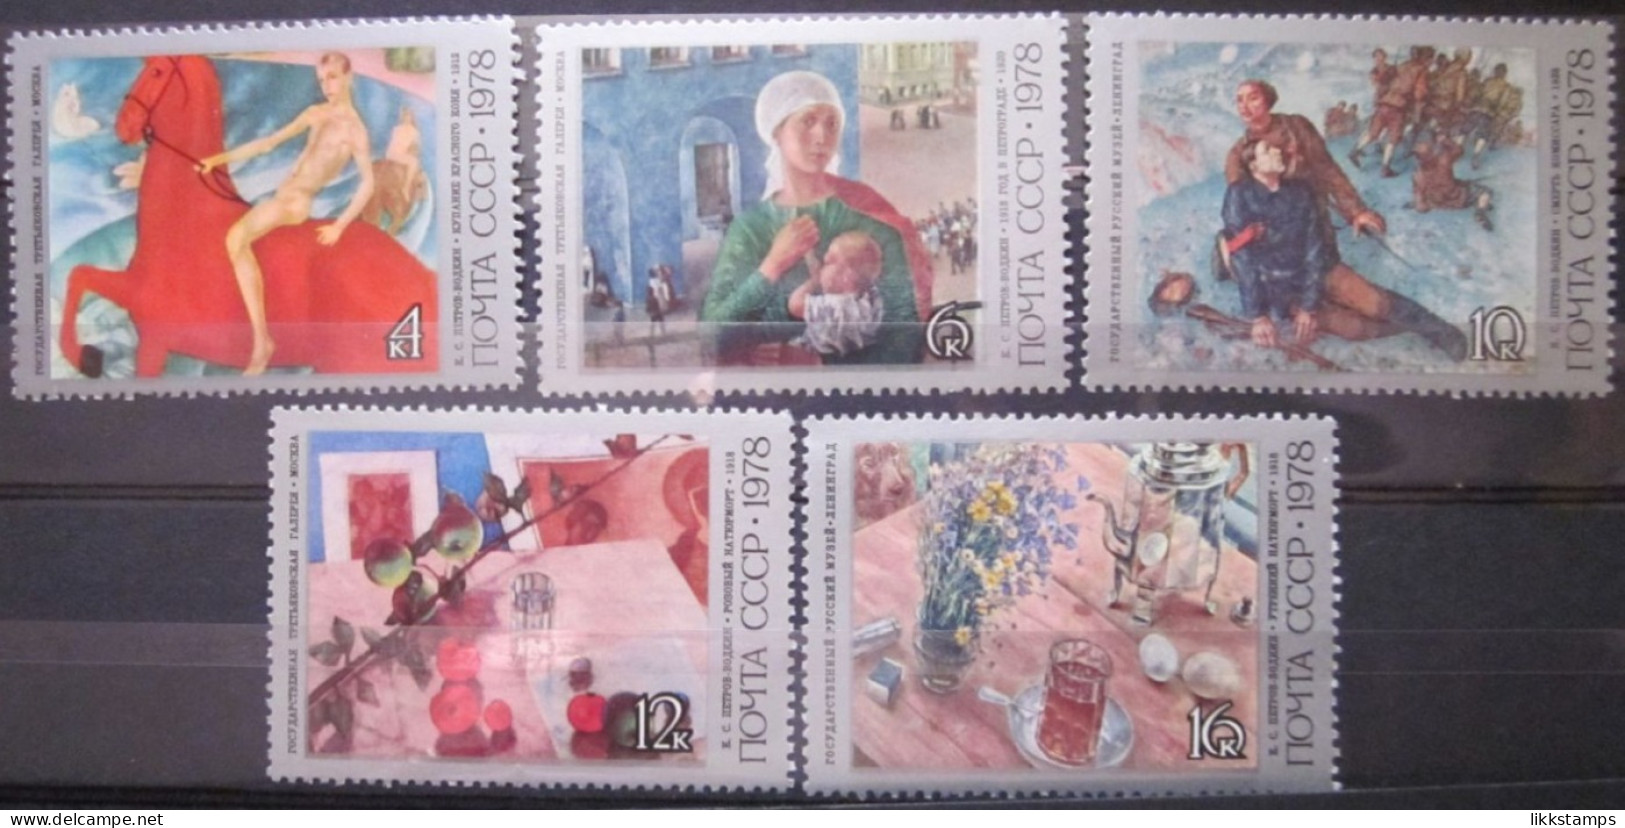 RUSSIA ~ 1978 ~ S.G. NUMBERS 4797 - 4801, ~ PAINTINGS. ~ MNH #03592 - Nuevos